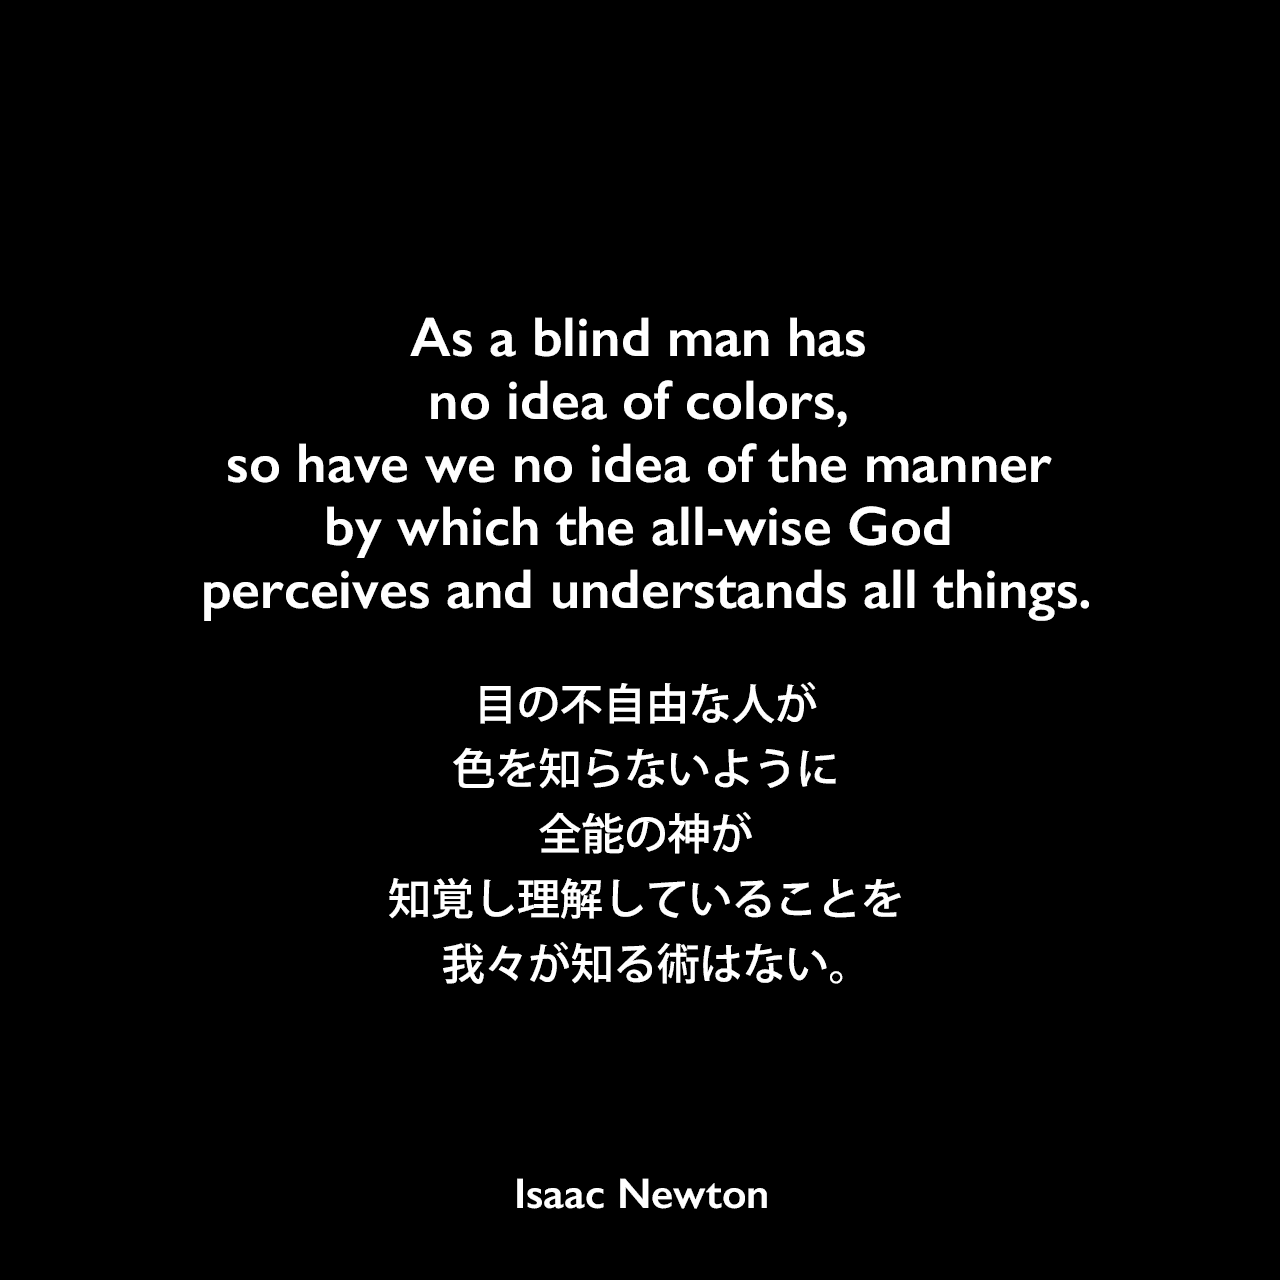 As a blind man has no idea of colors, so have we no idea of the manner by which the all-wise God perceives and understands all things.目の不自由な人が色を知らないように、全能の神が知覚し理解していることを我々が知る術はない。Isaac Newton